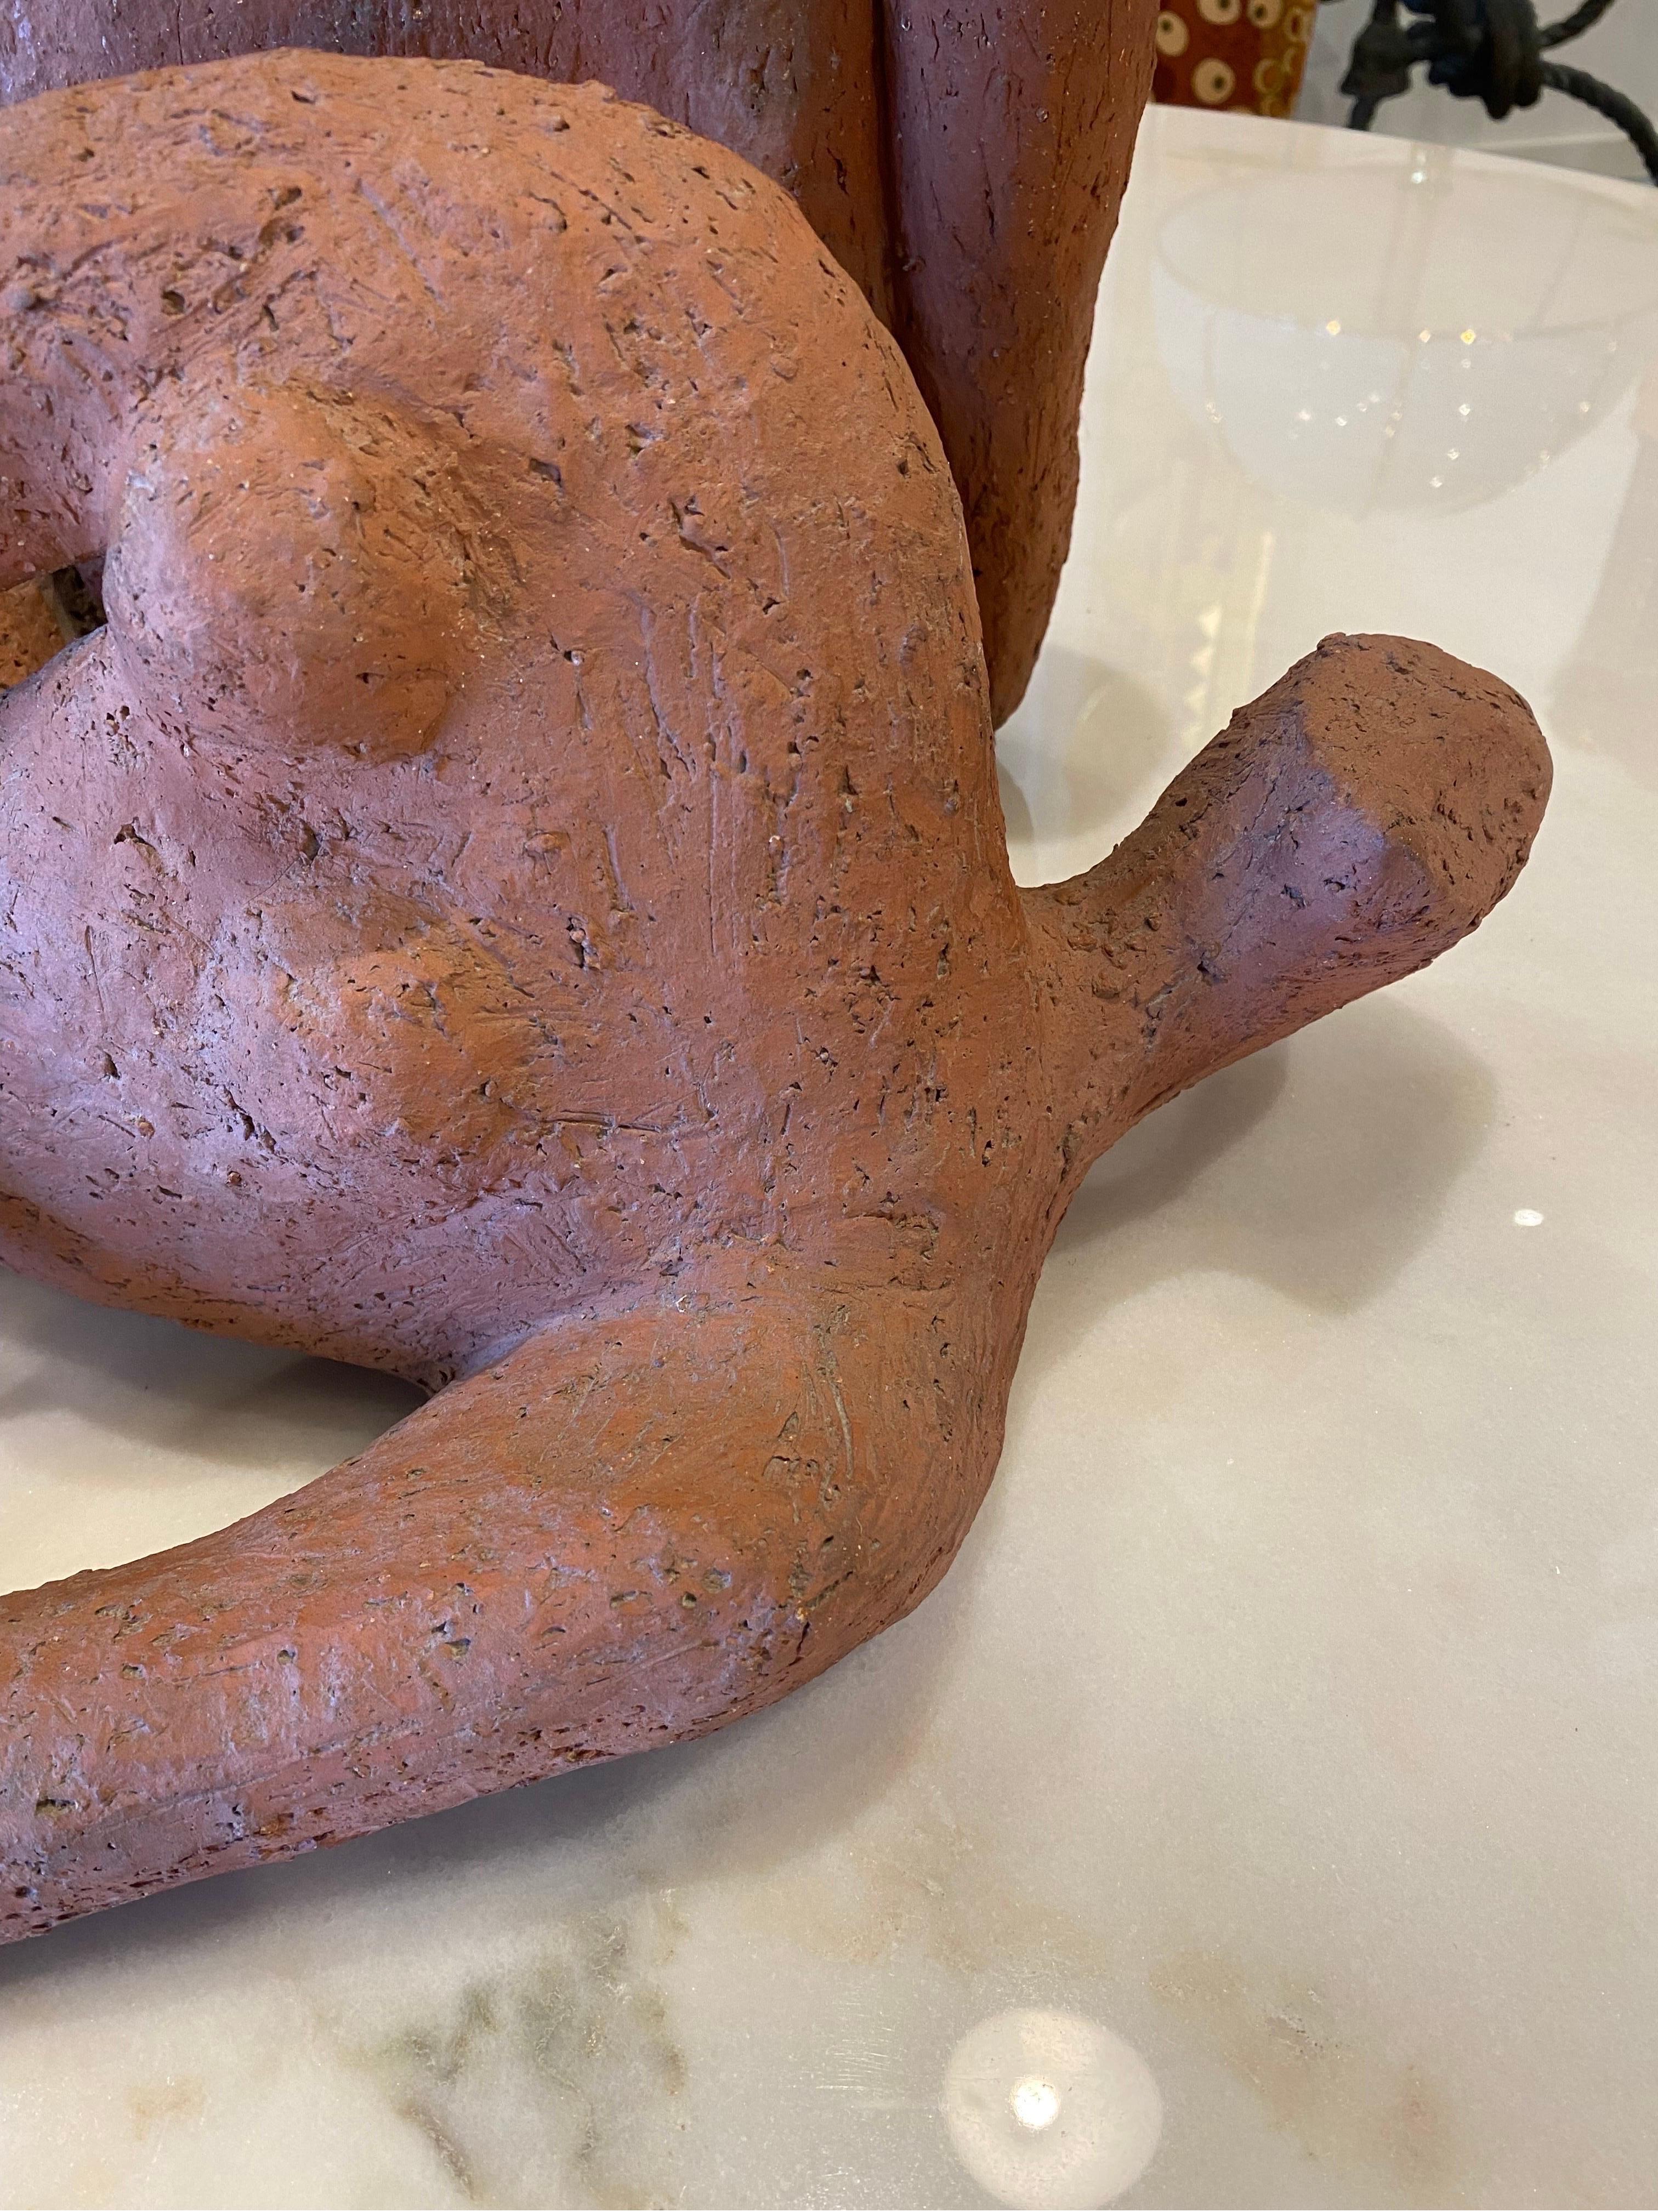 This is a very cool unsigned pair of clay nude sculptures from the 1960's that have a very good resemblance to Henry Moore's works. They are clay or terra cotta and the upright sculpture has a slightly darker red hue than the reclining one. Upright